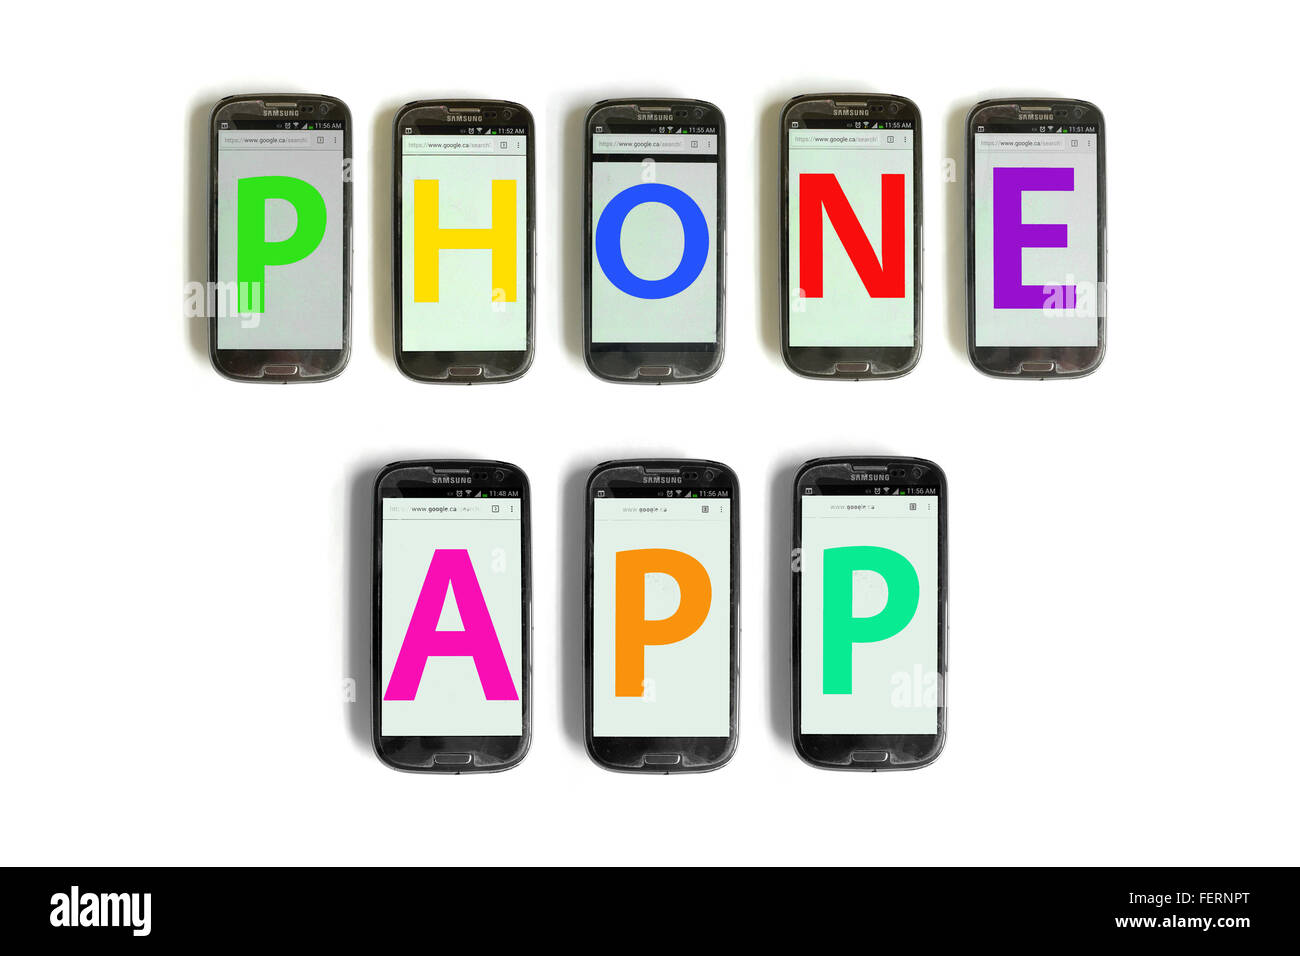 Phone App on the screens of smartphones photographed against a white background. Stock Photo